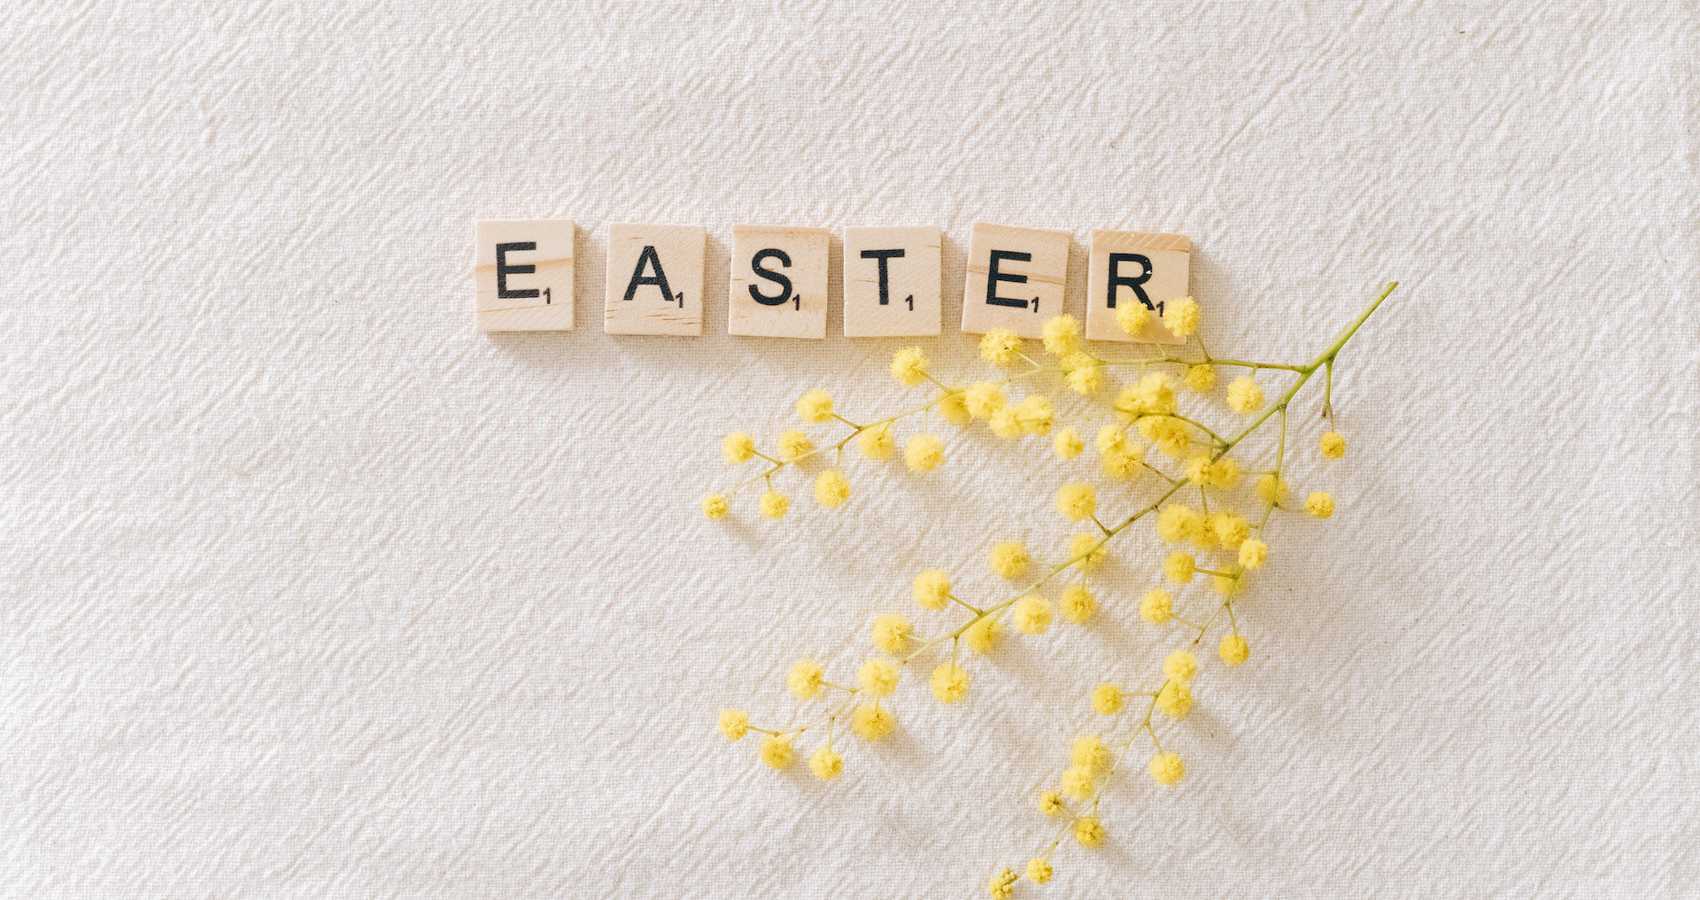 Easter Zunday, a poem by William Barnes at spillwords.com